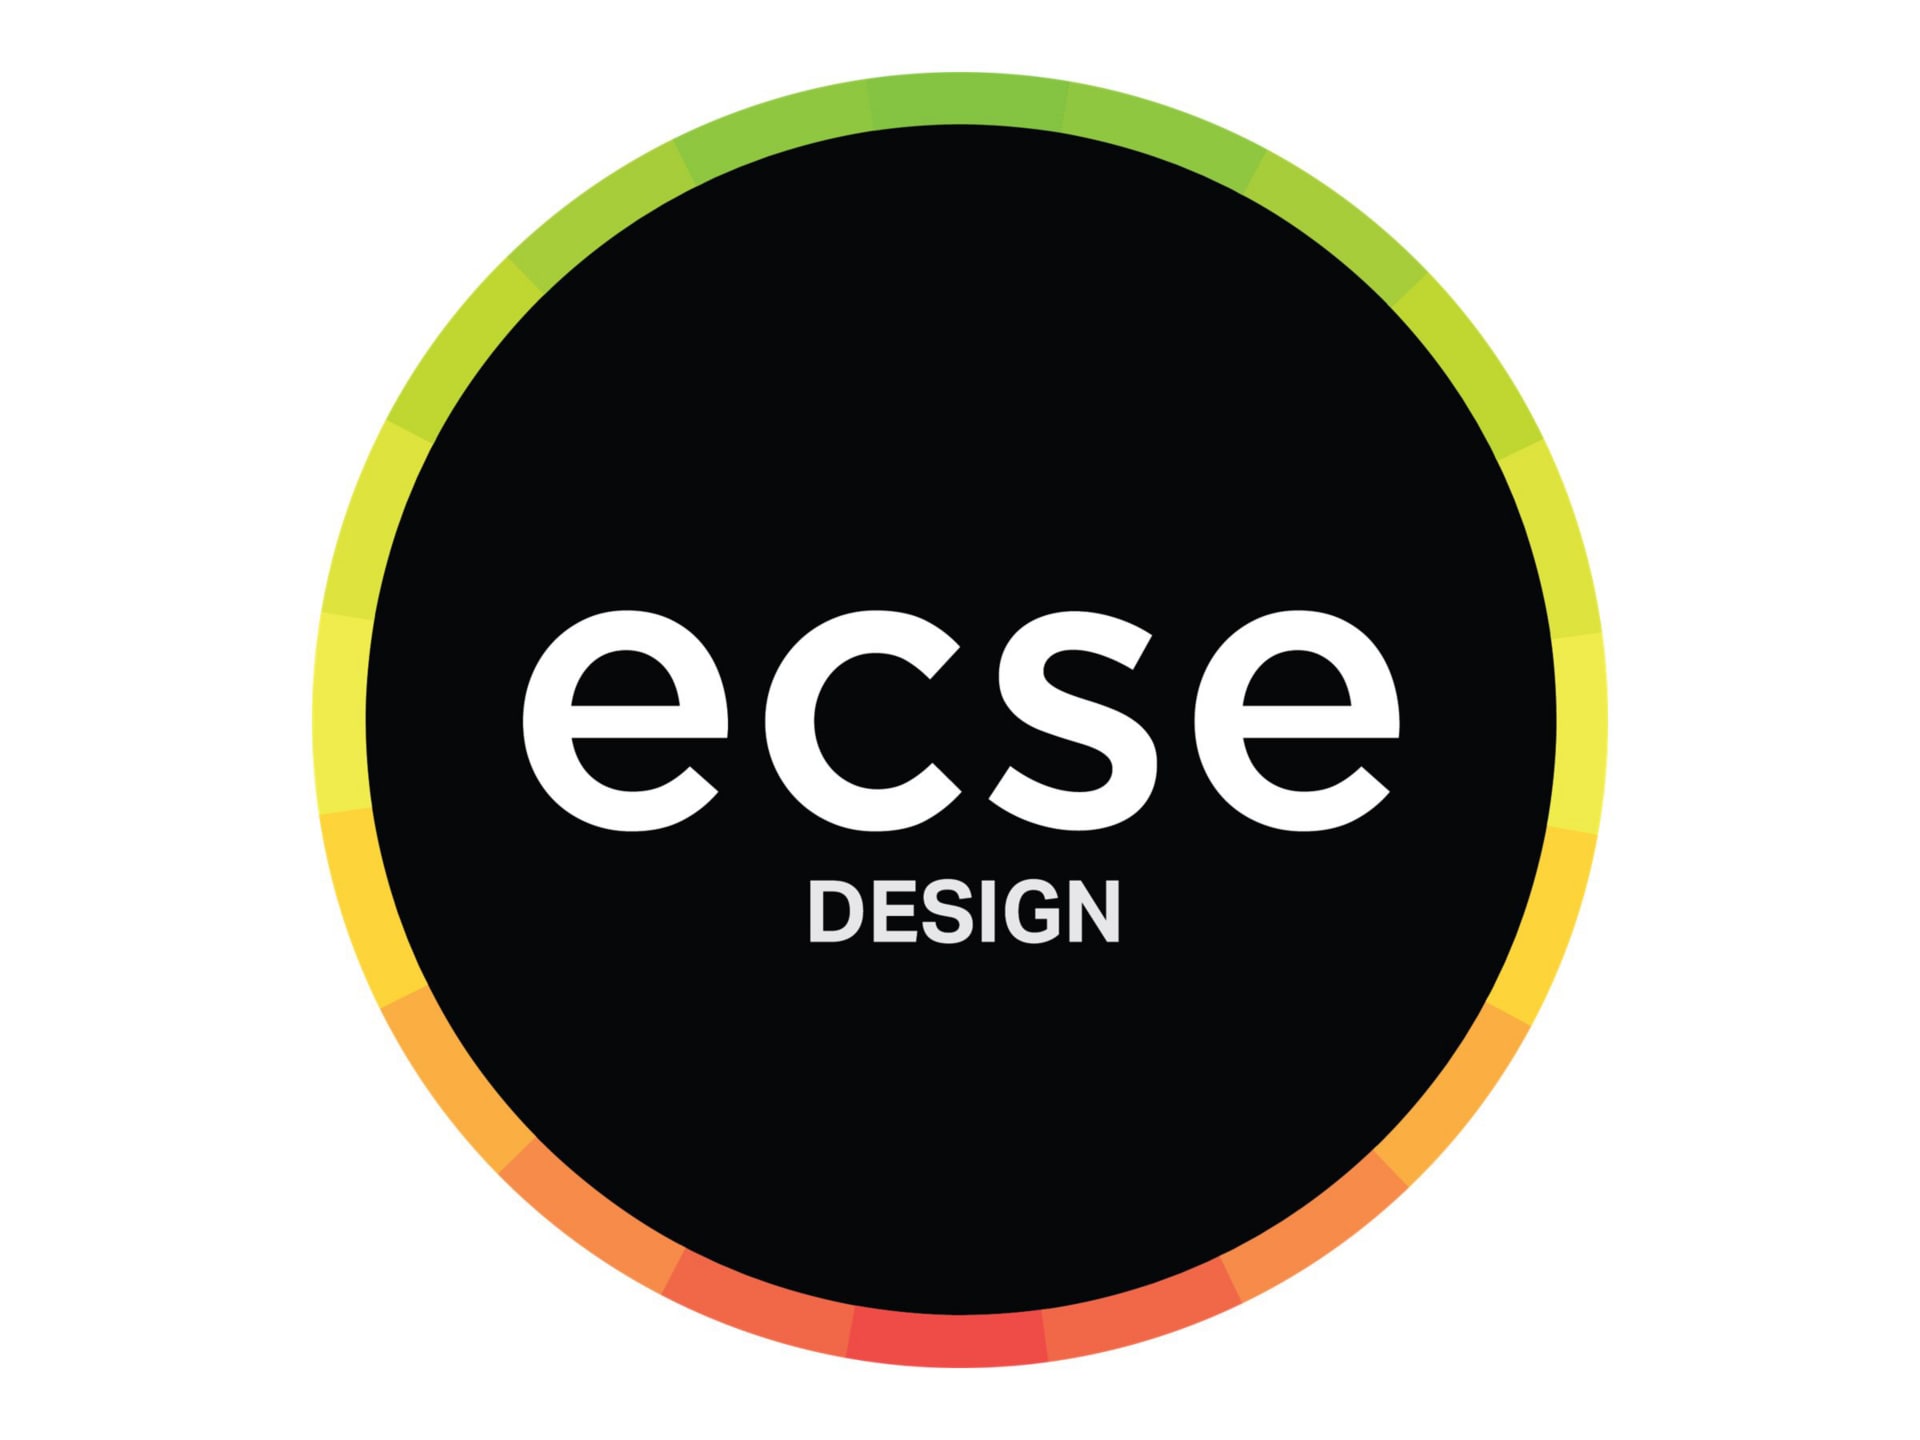 ECSE Design - Learn the Basics of Wi-Fi and How to Use Ekahau - lectures an